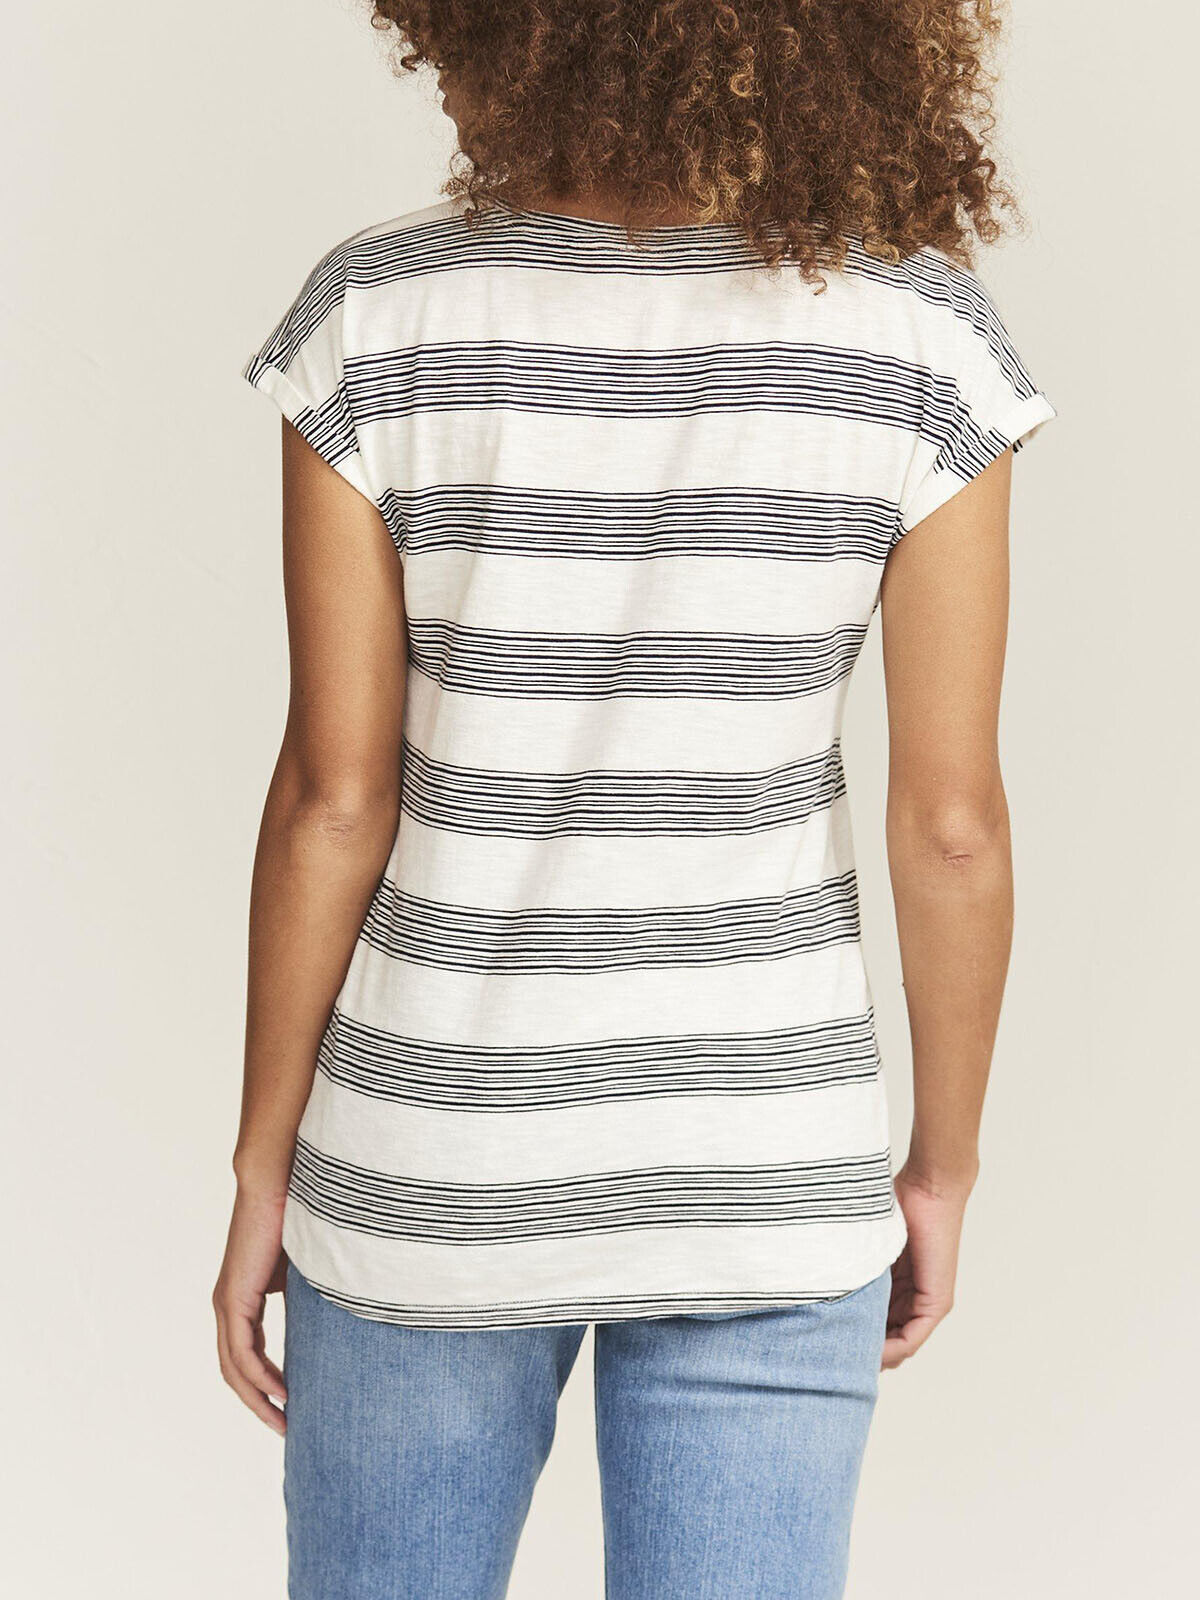 EX Fat Face Ivory Ivy Stripe T-Shirt in Sizes 12, 16, 22 RRP £22